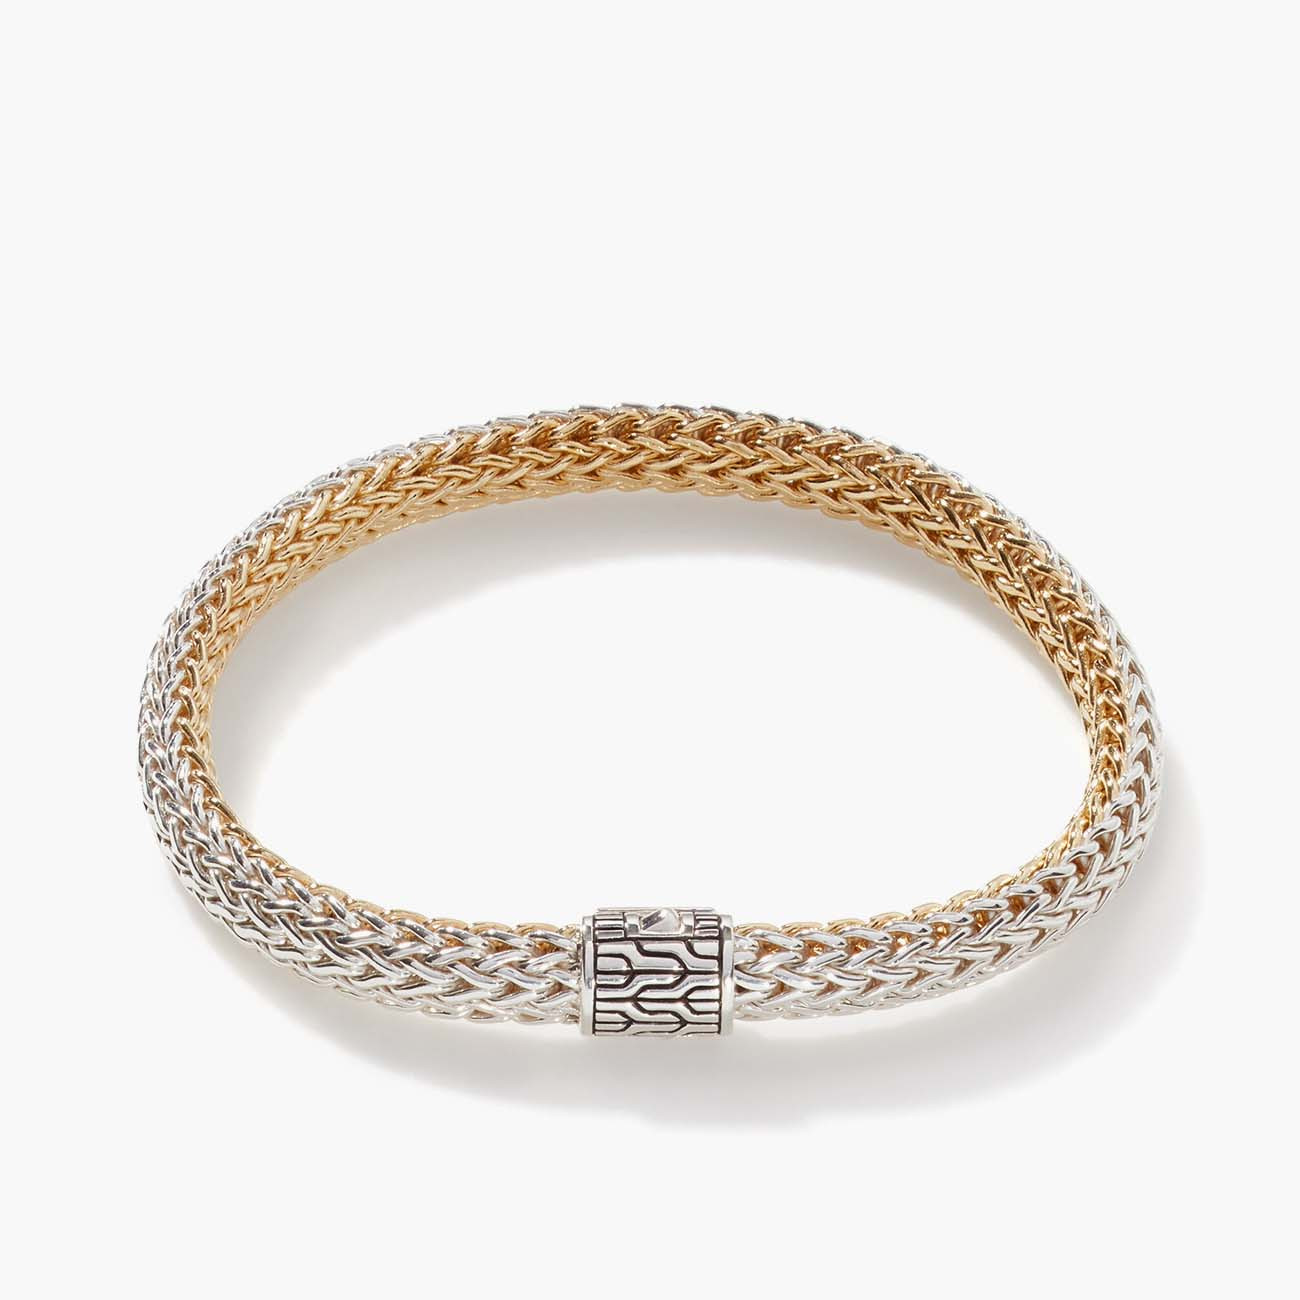 Reversible yellow and white gold bracelet with diamonds